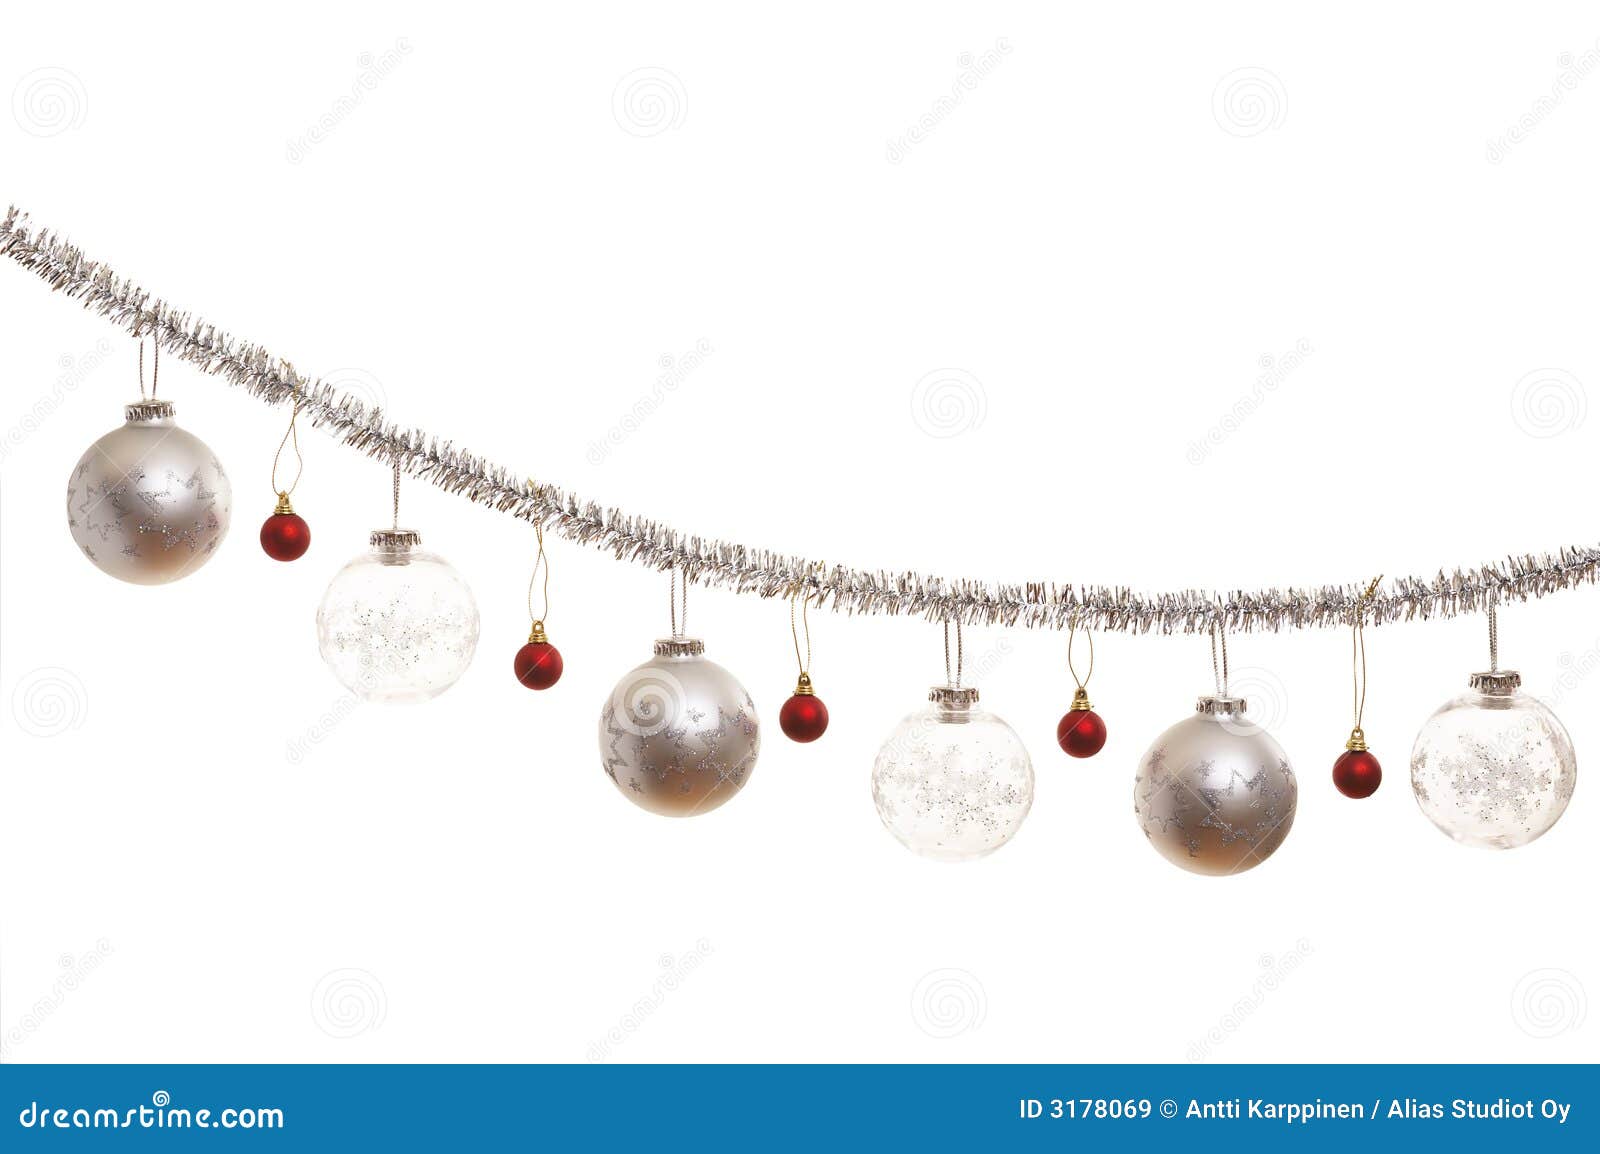 Christmas Decorations Royalty Free Stock Images - Image: 3178069